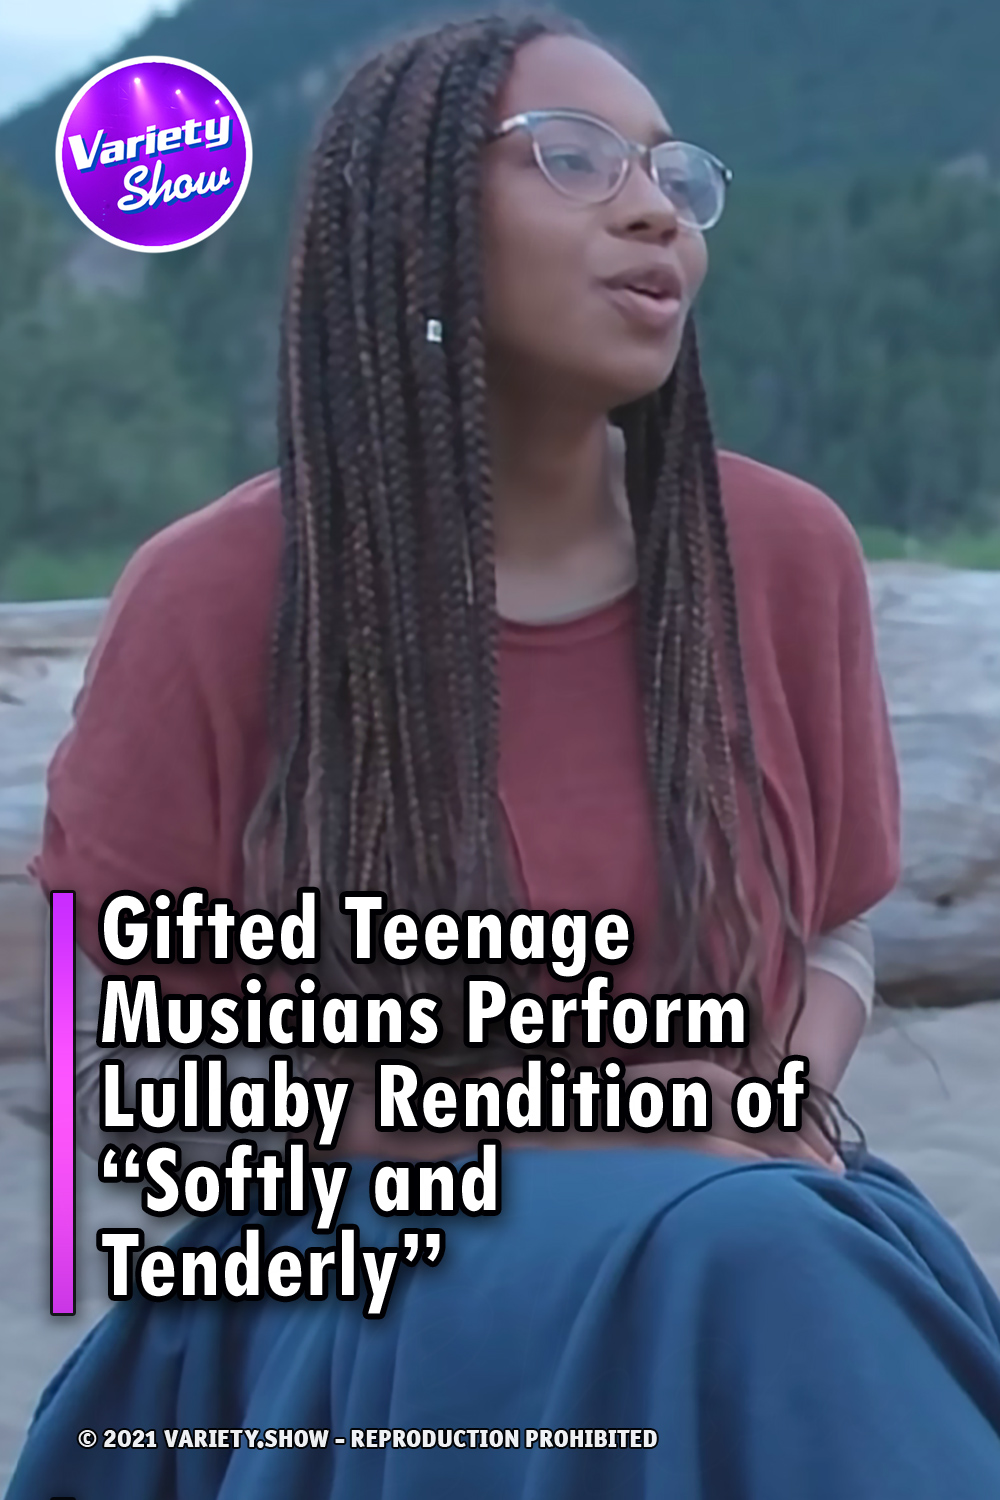 Gifted Teenage Musicians Perform Lullaby Rendition of “Softly and Tenderly”